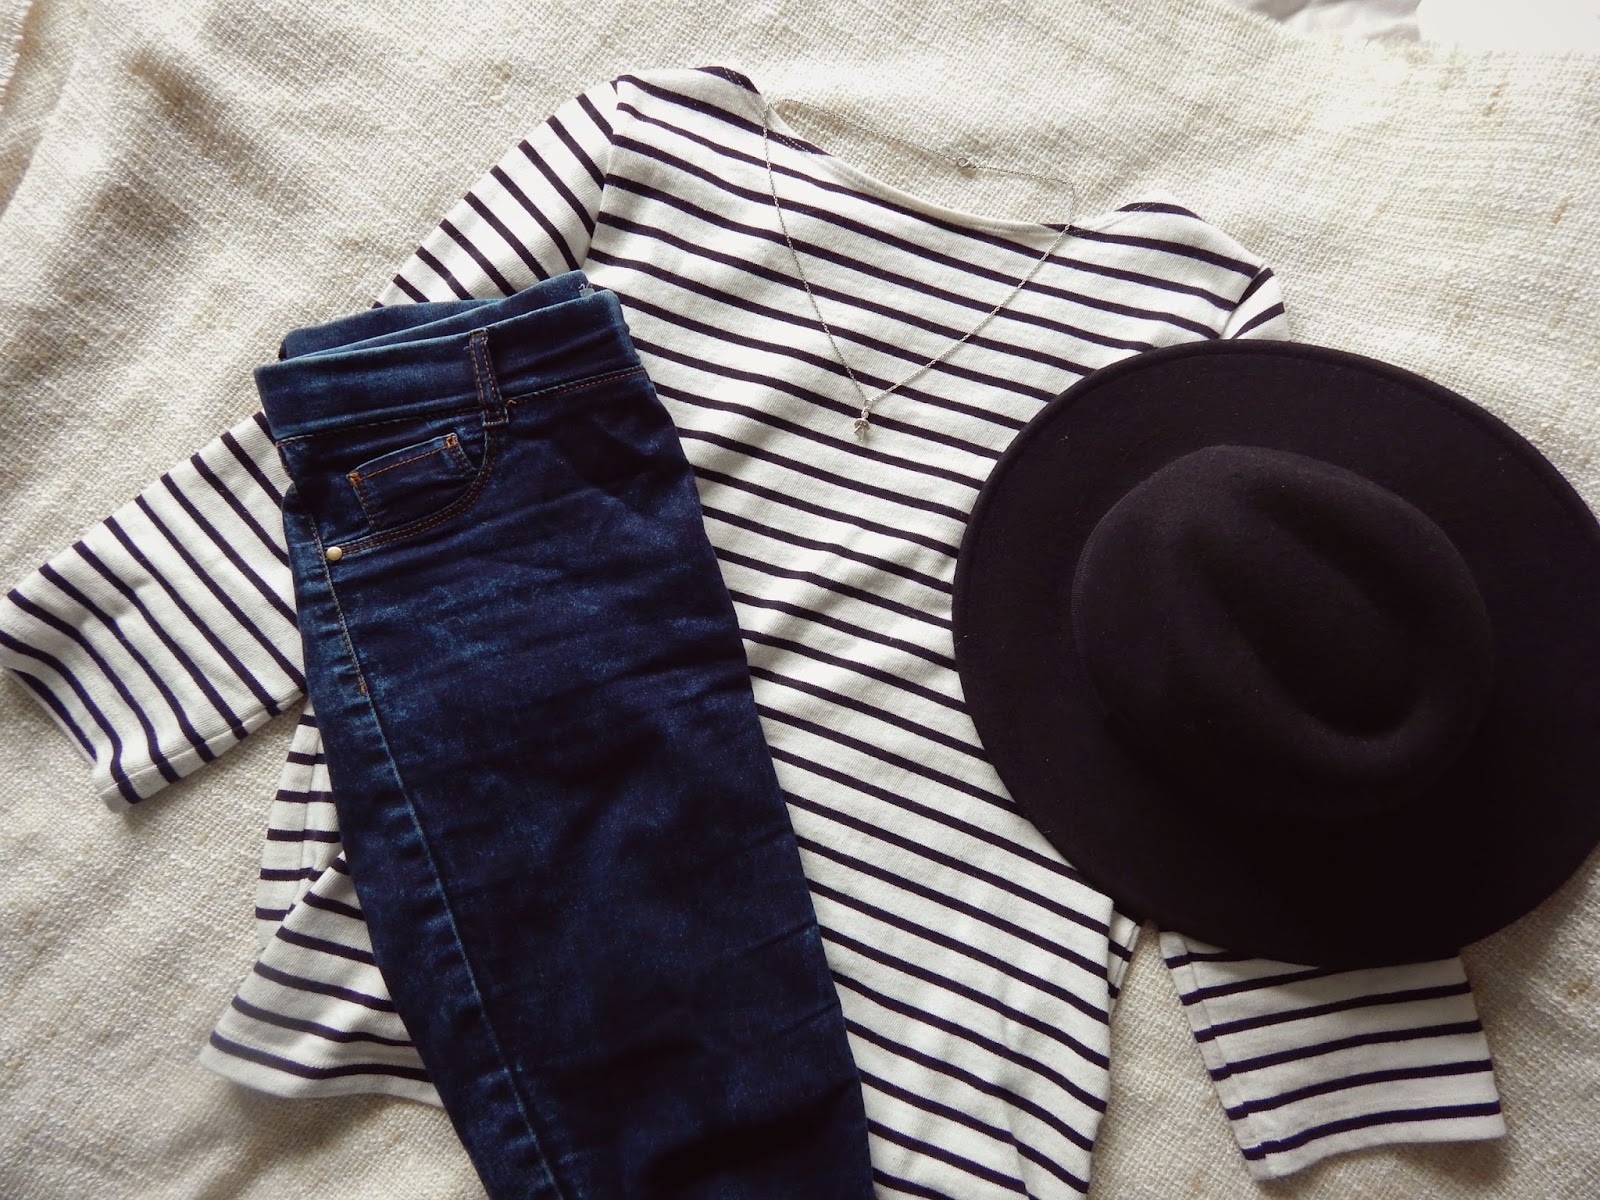 Stripy Outfit